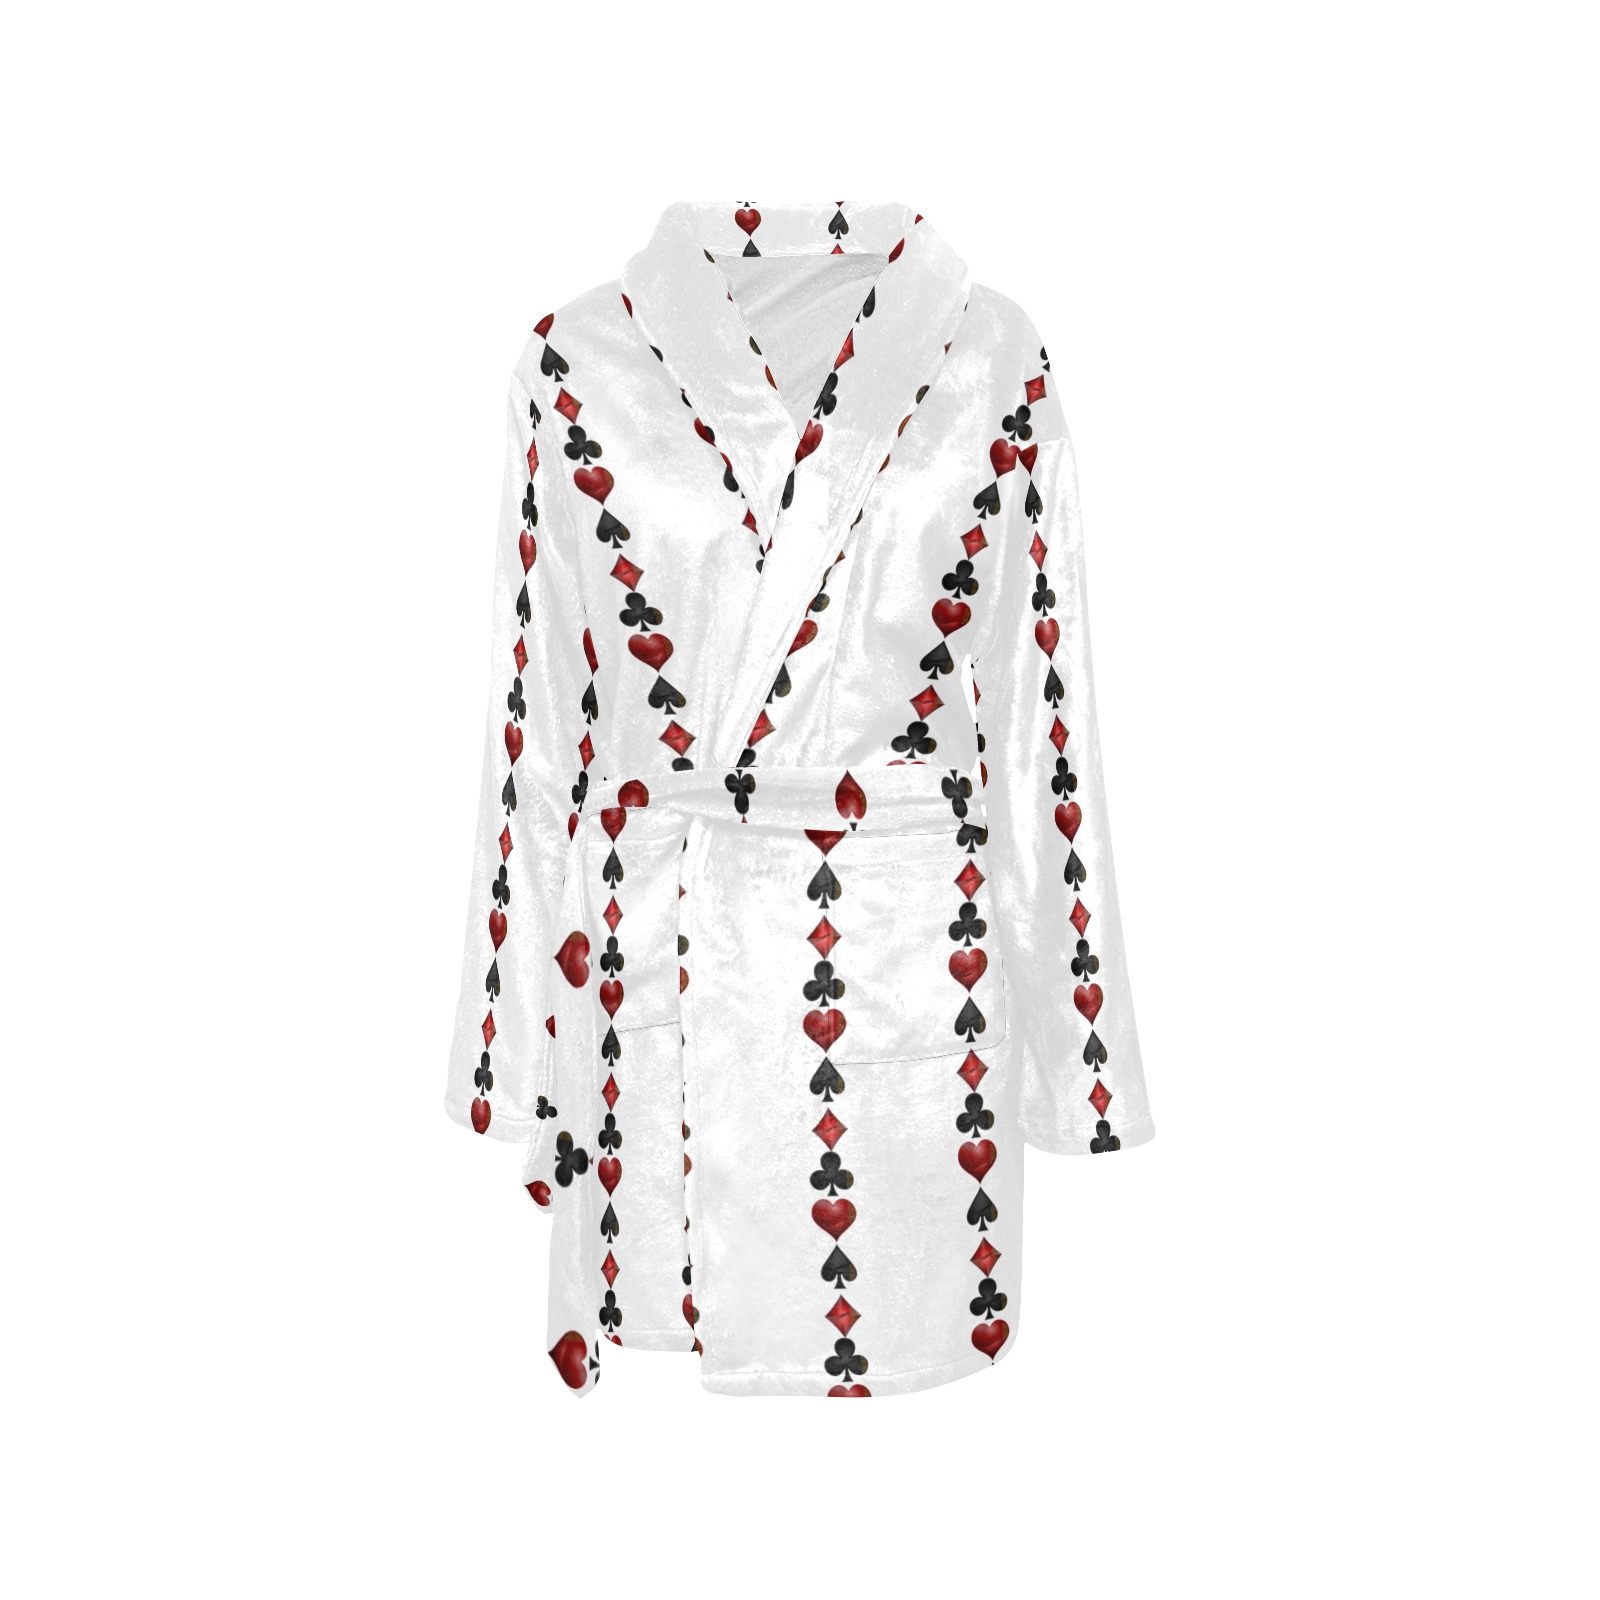 Black Red Playing Card Shapes - White Women's All Over Print Night Robe